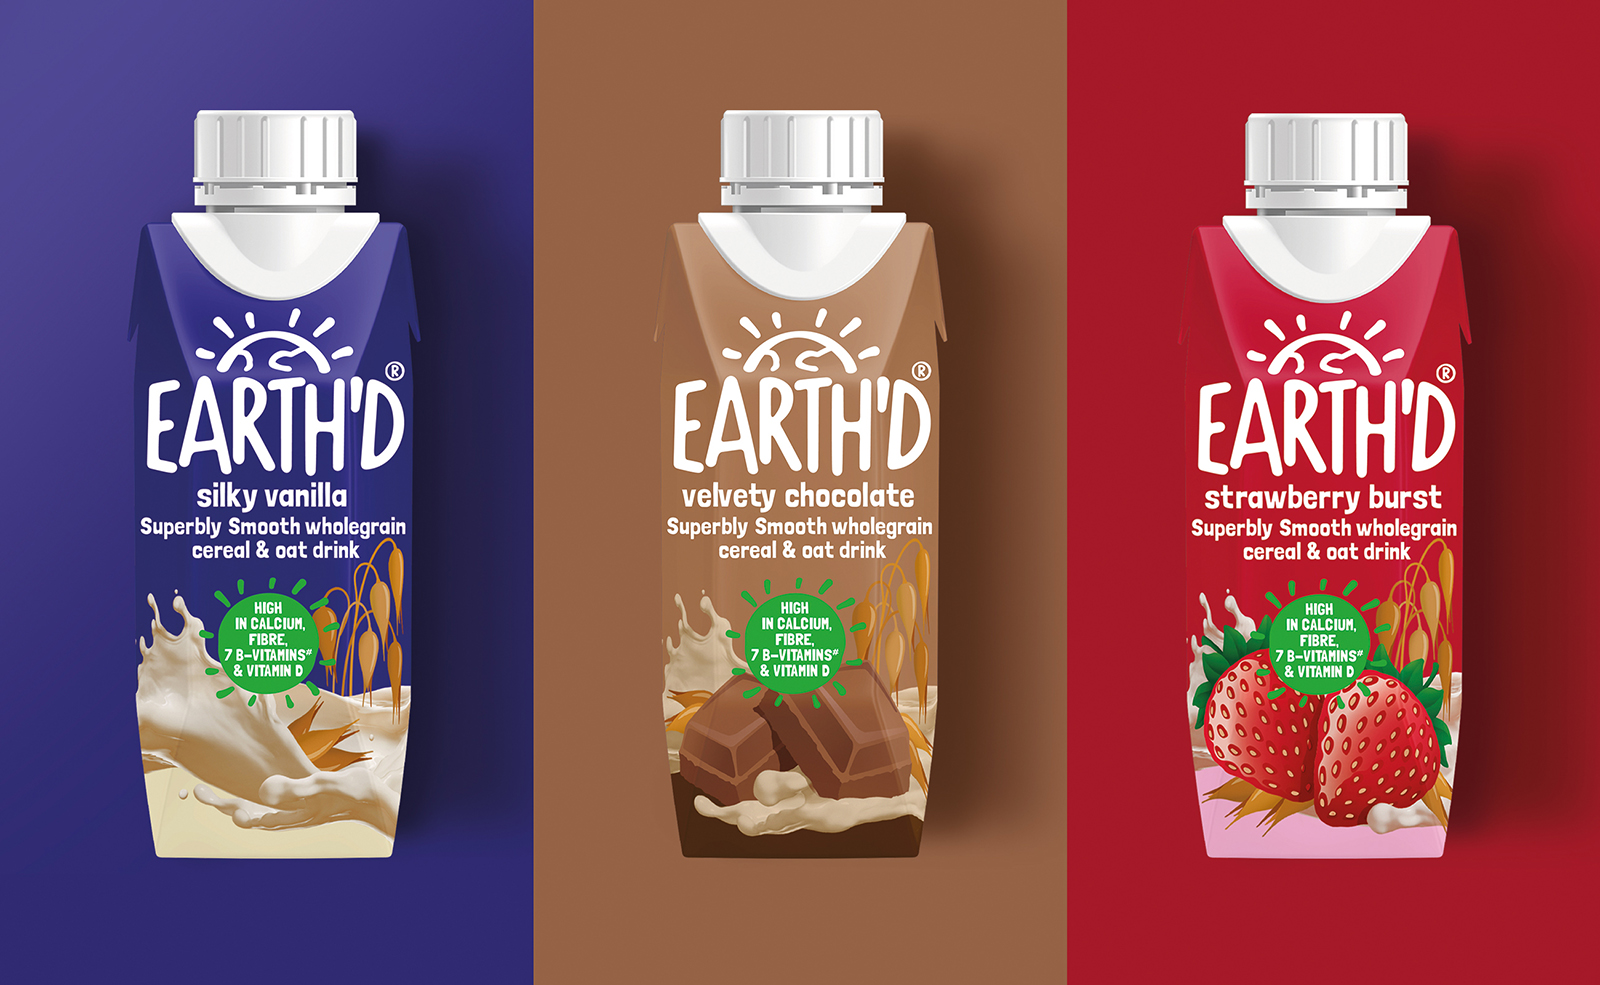 Hunt Hanson Creates Earth’d, a New Brand Serving Up Delicious Plant-based Drinks